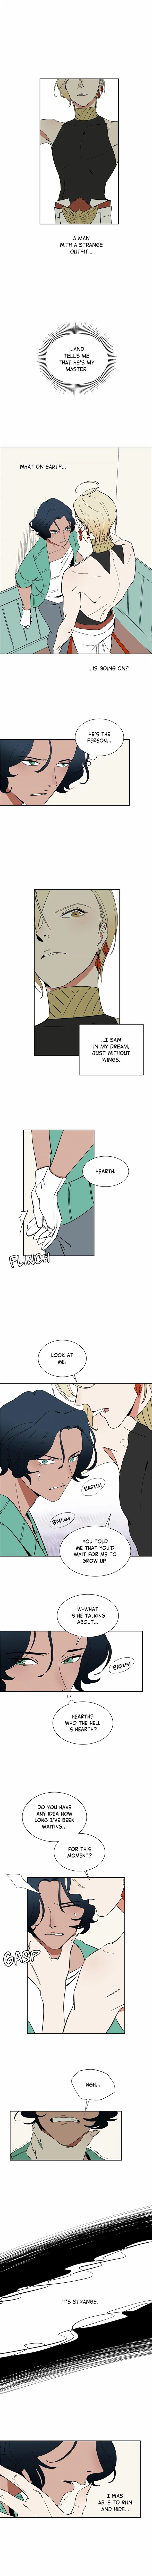 Wind Beneath My Wings - Page 3